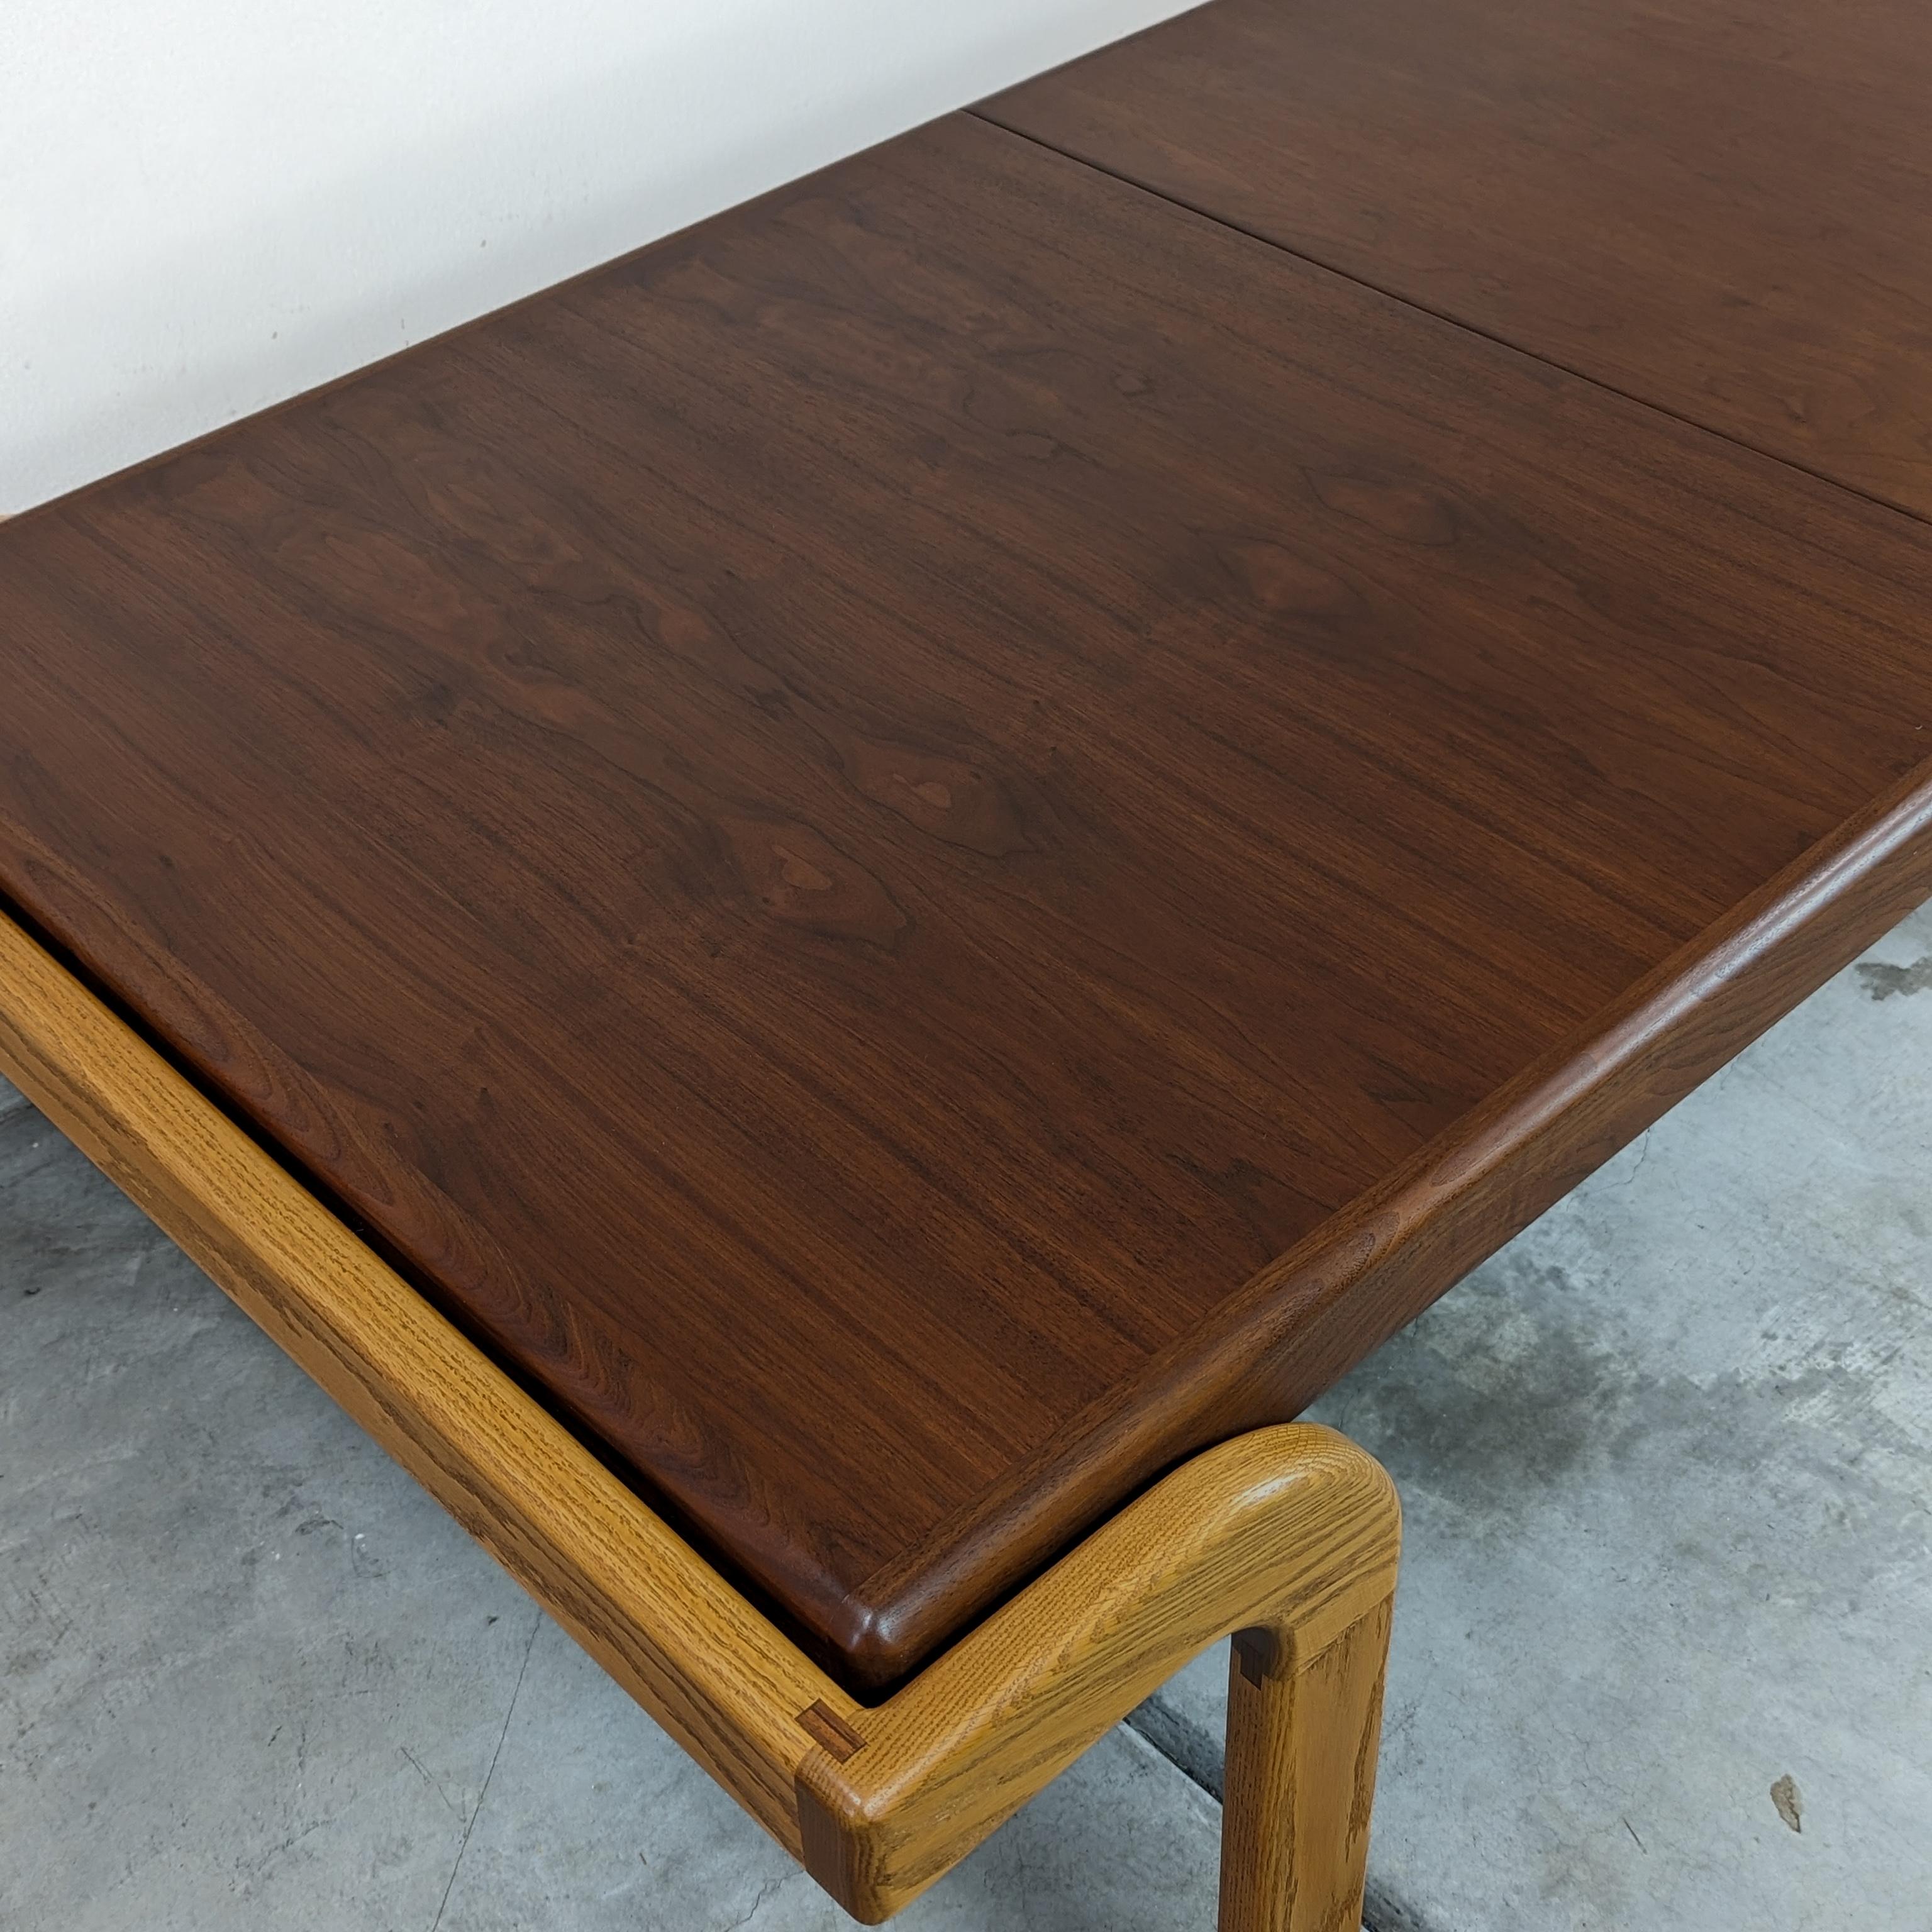 Rare Mid Century Walnut & Oak Dining Table by Lou Hodges, c1970s For Sale 4